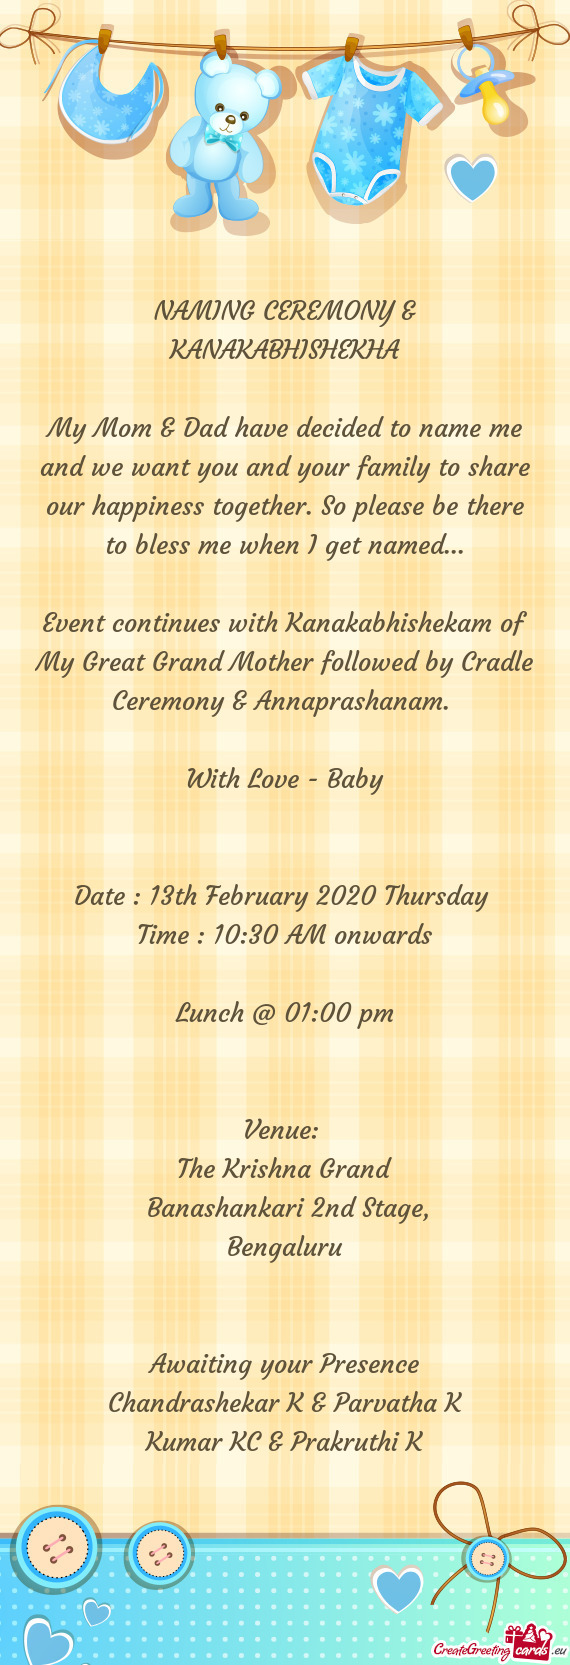 Event continues with Kanakabhishekam of My Great Grand Mother followed by Cradle Ceremony & Annapras